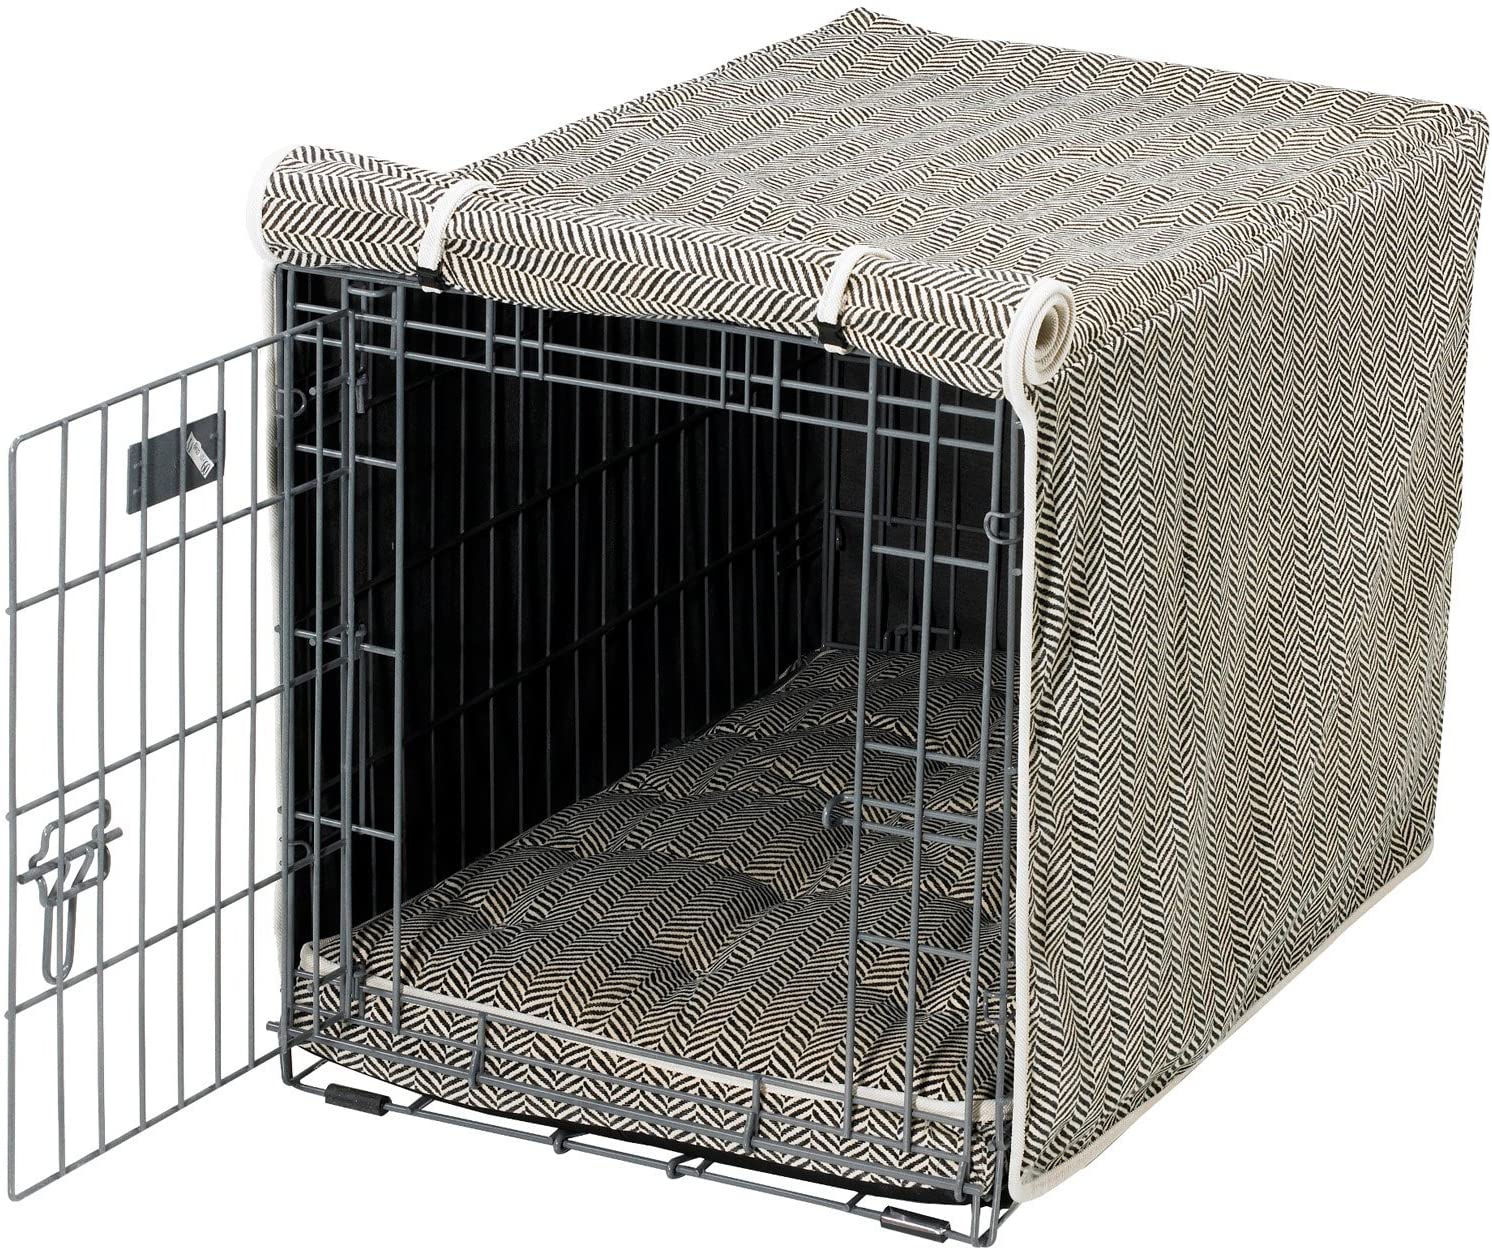 Pockets and Mesh Window for Small Medium and Large Dog Dog Crate Cover with 1 2 3 Doors Oxford Fabric Pet Kennel Cover Universal Fit for 24 30 36 42 48 Inch Dog Crate 